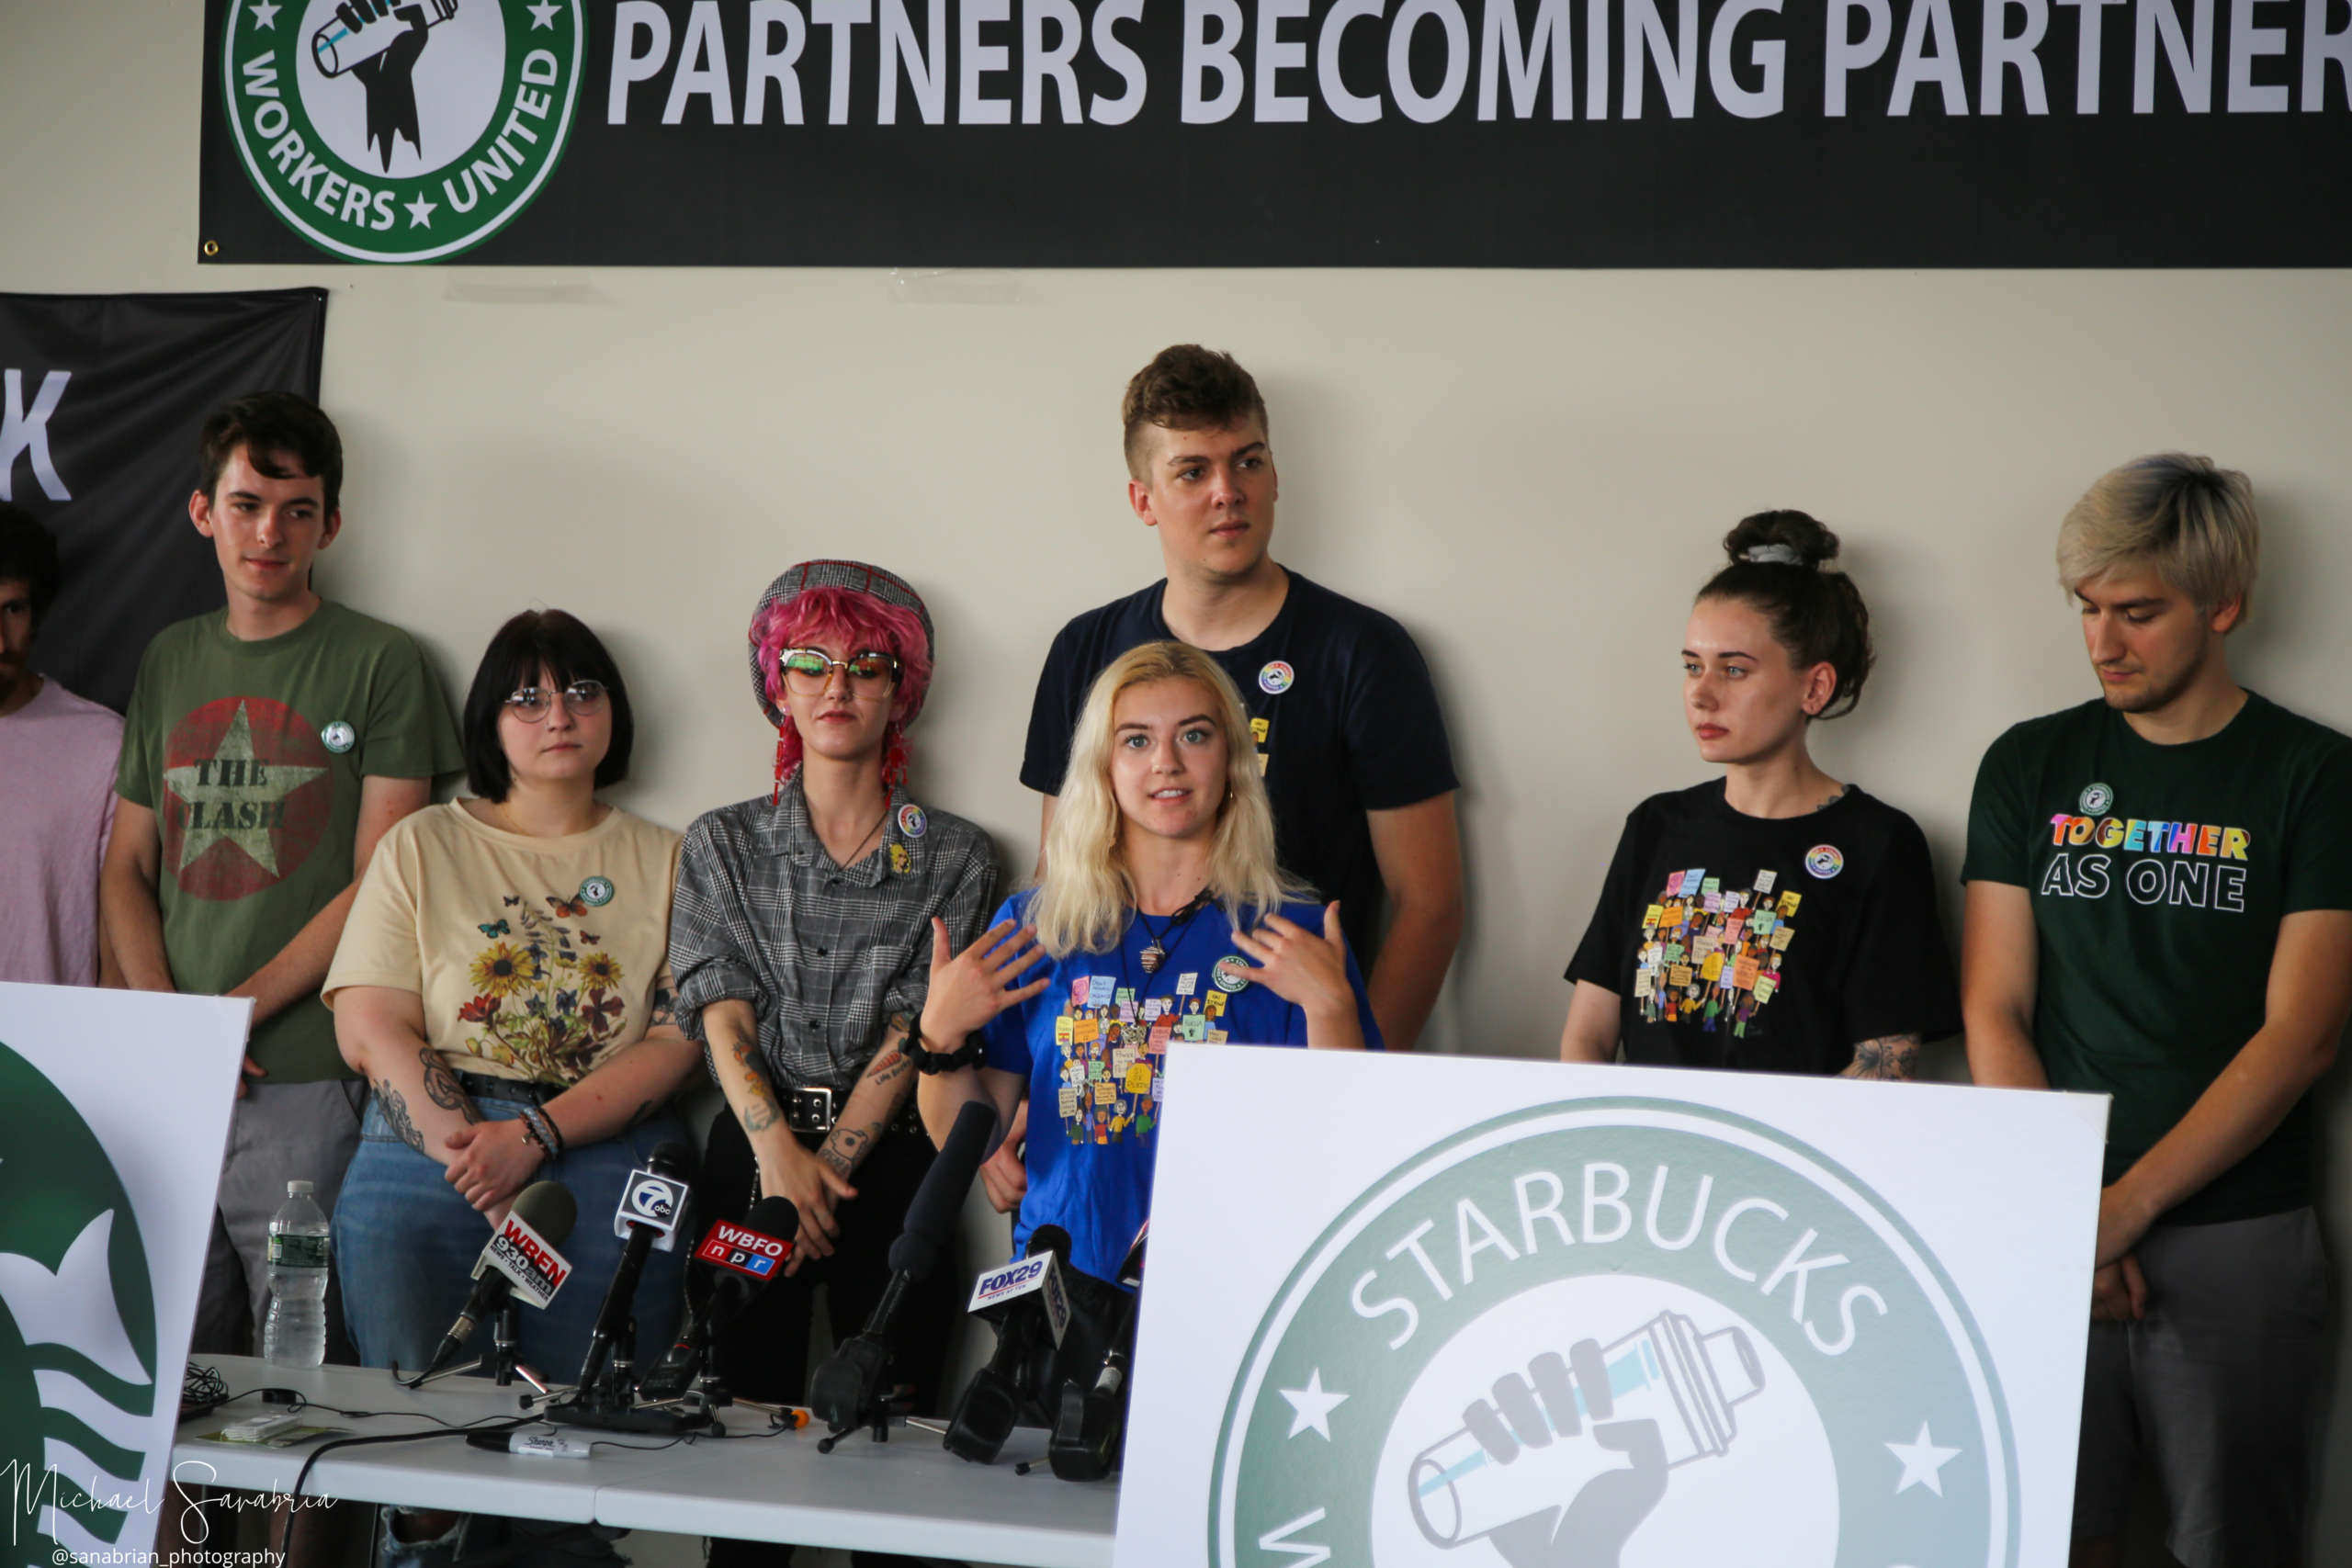 Several Starbuck's employees speaking to reporters form behind a table.